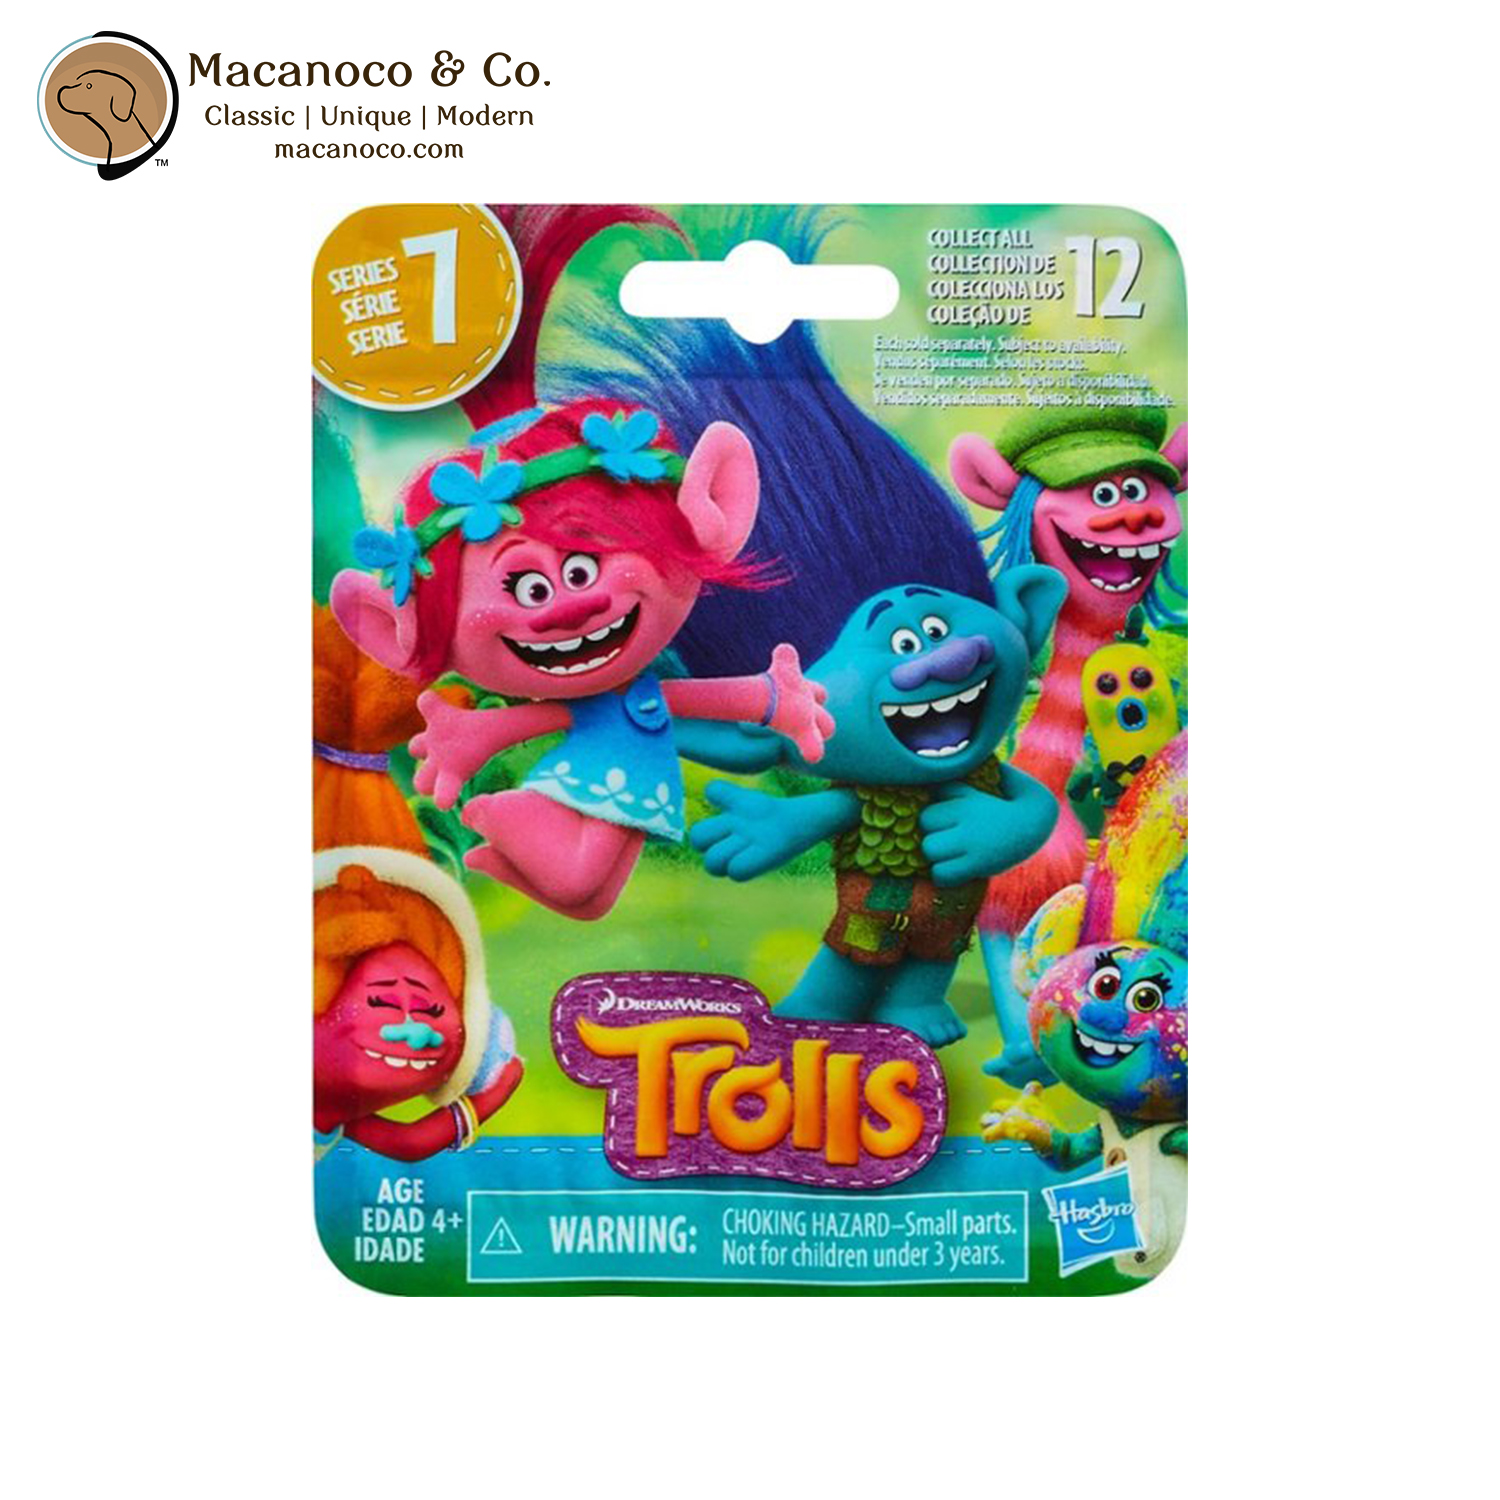 DreamWorks Trolls Surprise Mini Figure, Series may vary  Mini figures,  Candy easter basket, Trolls birthday party